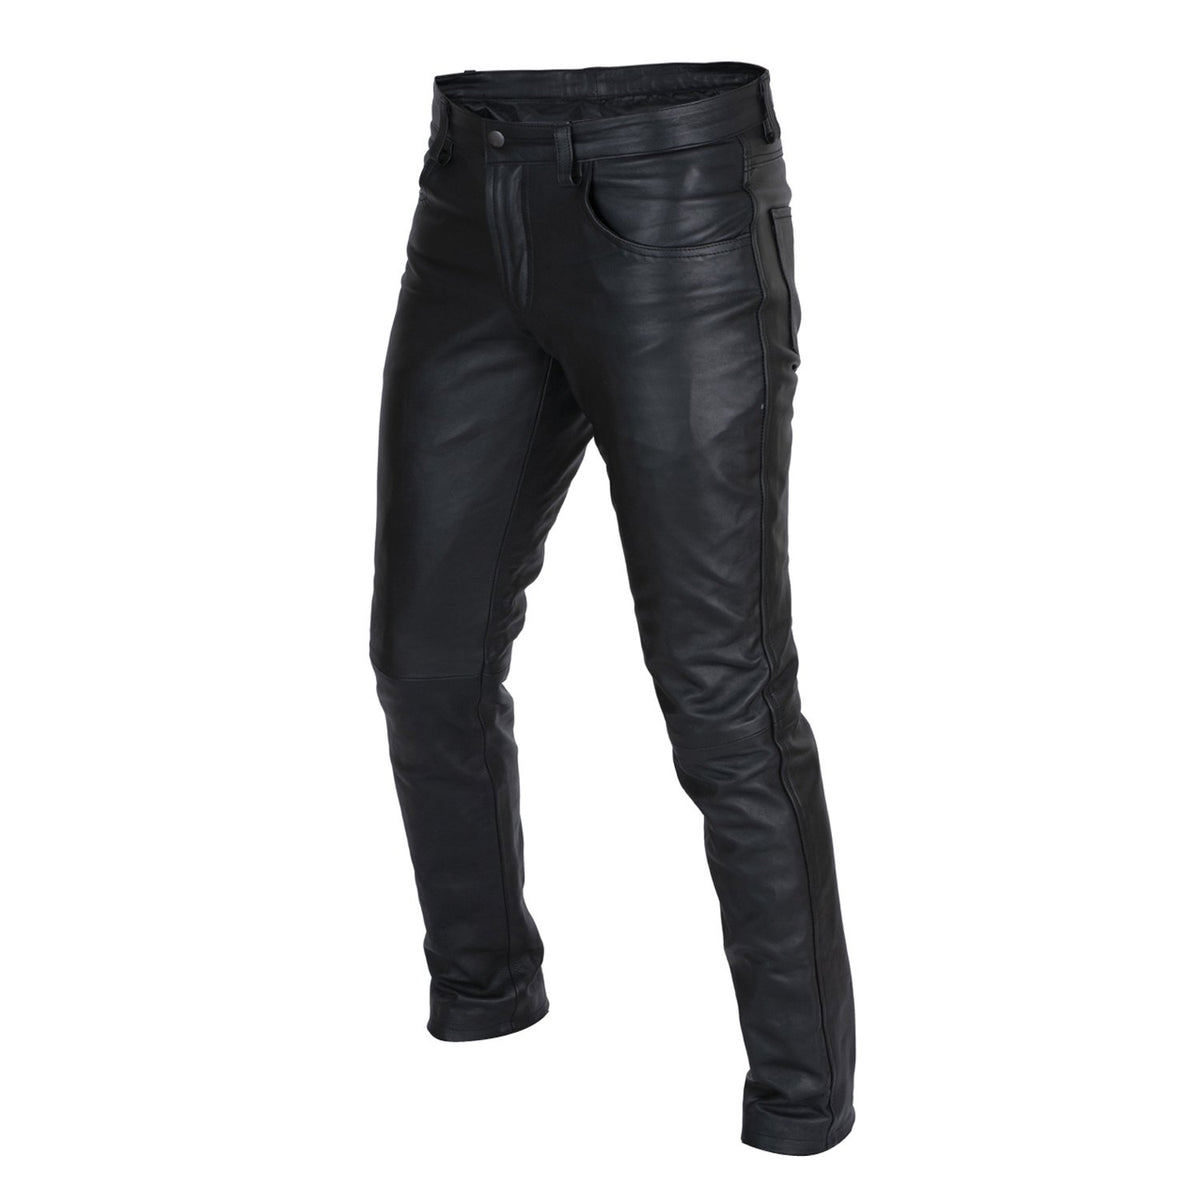 Leather Pants for Men Slim Fit Skinny Stretch Faux Leather Motorcycle Biker  Pants Fashion Punk Retro Goth Hip Hop Trousers Cargo Pants for Men Street Leather  Pants Mulit Pockets (A013-Black,Small) at Amazon